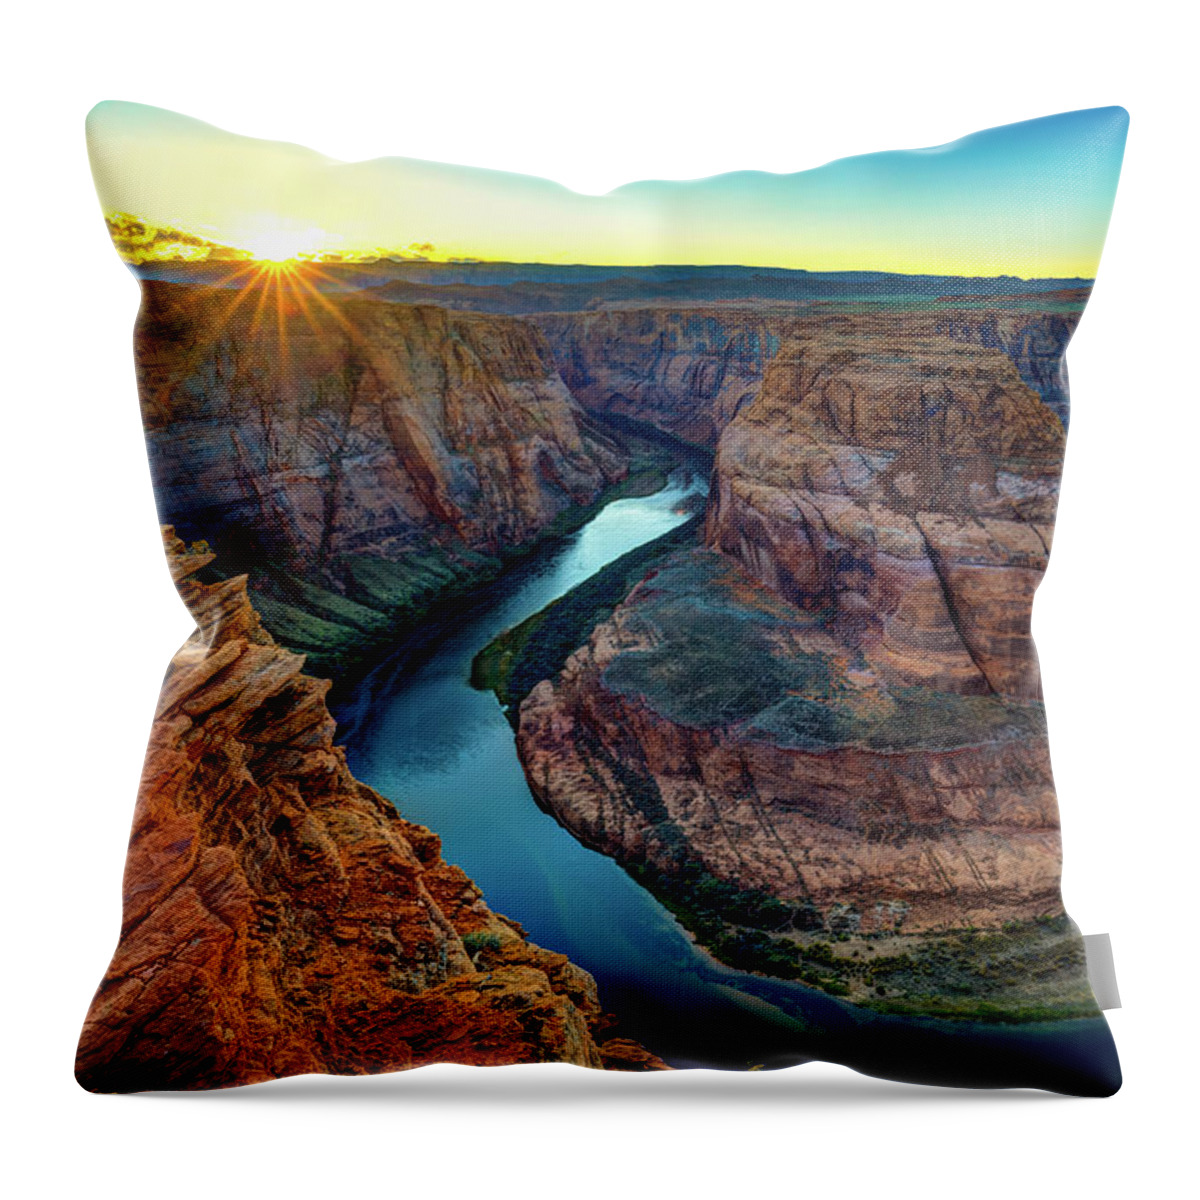 Arizona Throw Pillow featuring the photograph Horseshoe Bend Sunset by Raul Rodriguez